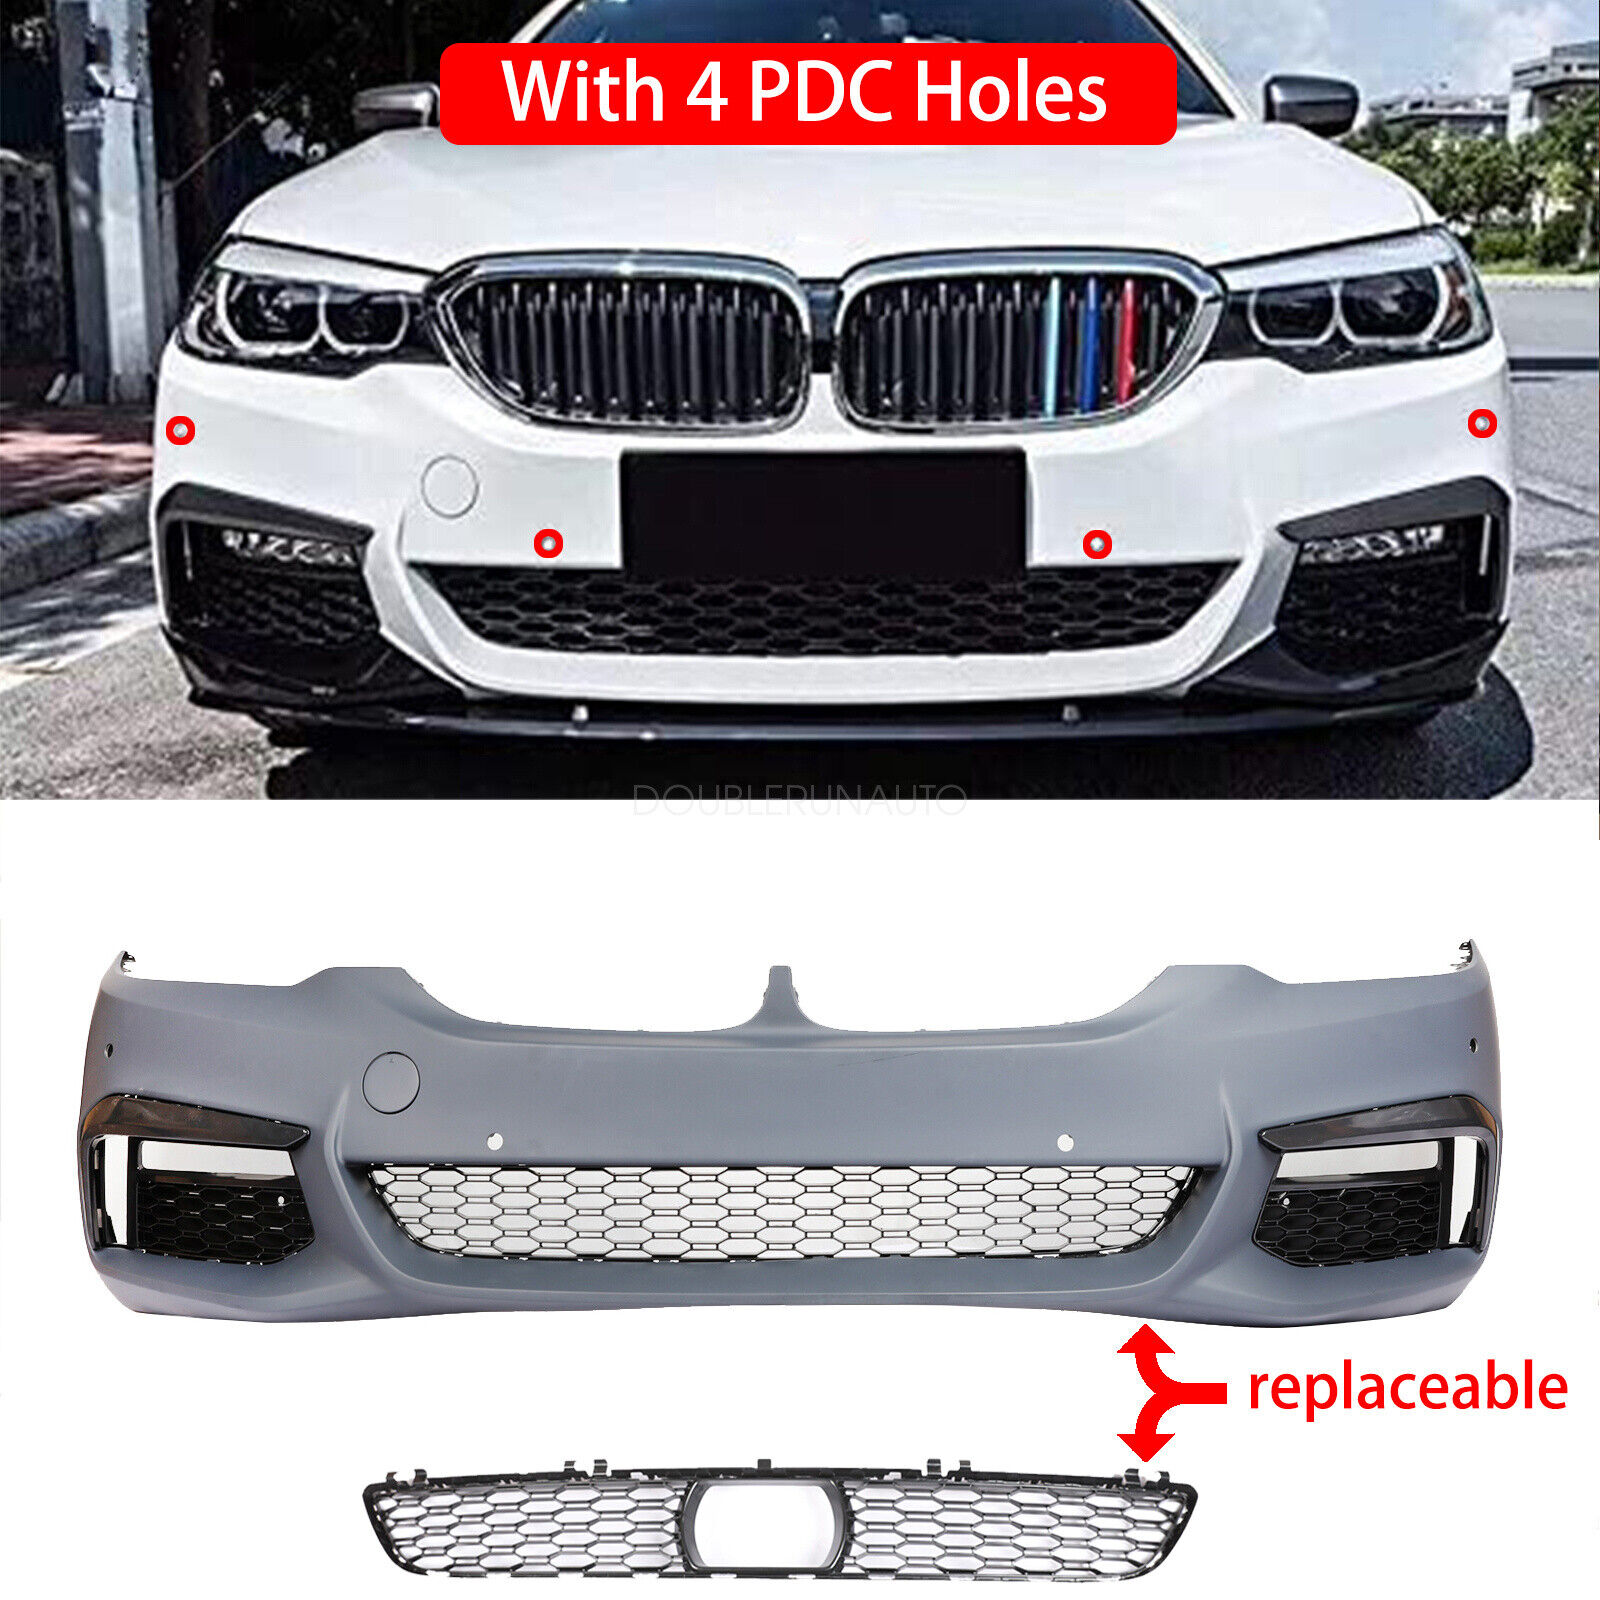 Mtech Style Front Bumper Body Kit W/ 4 PDC Holes For BMW G30 530i 530e 540i